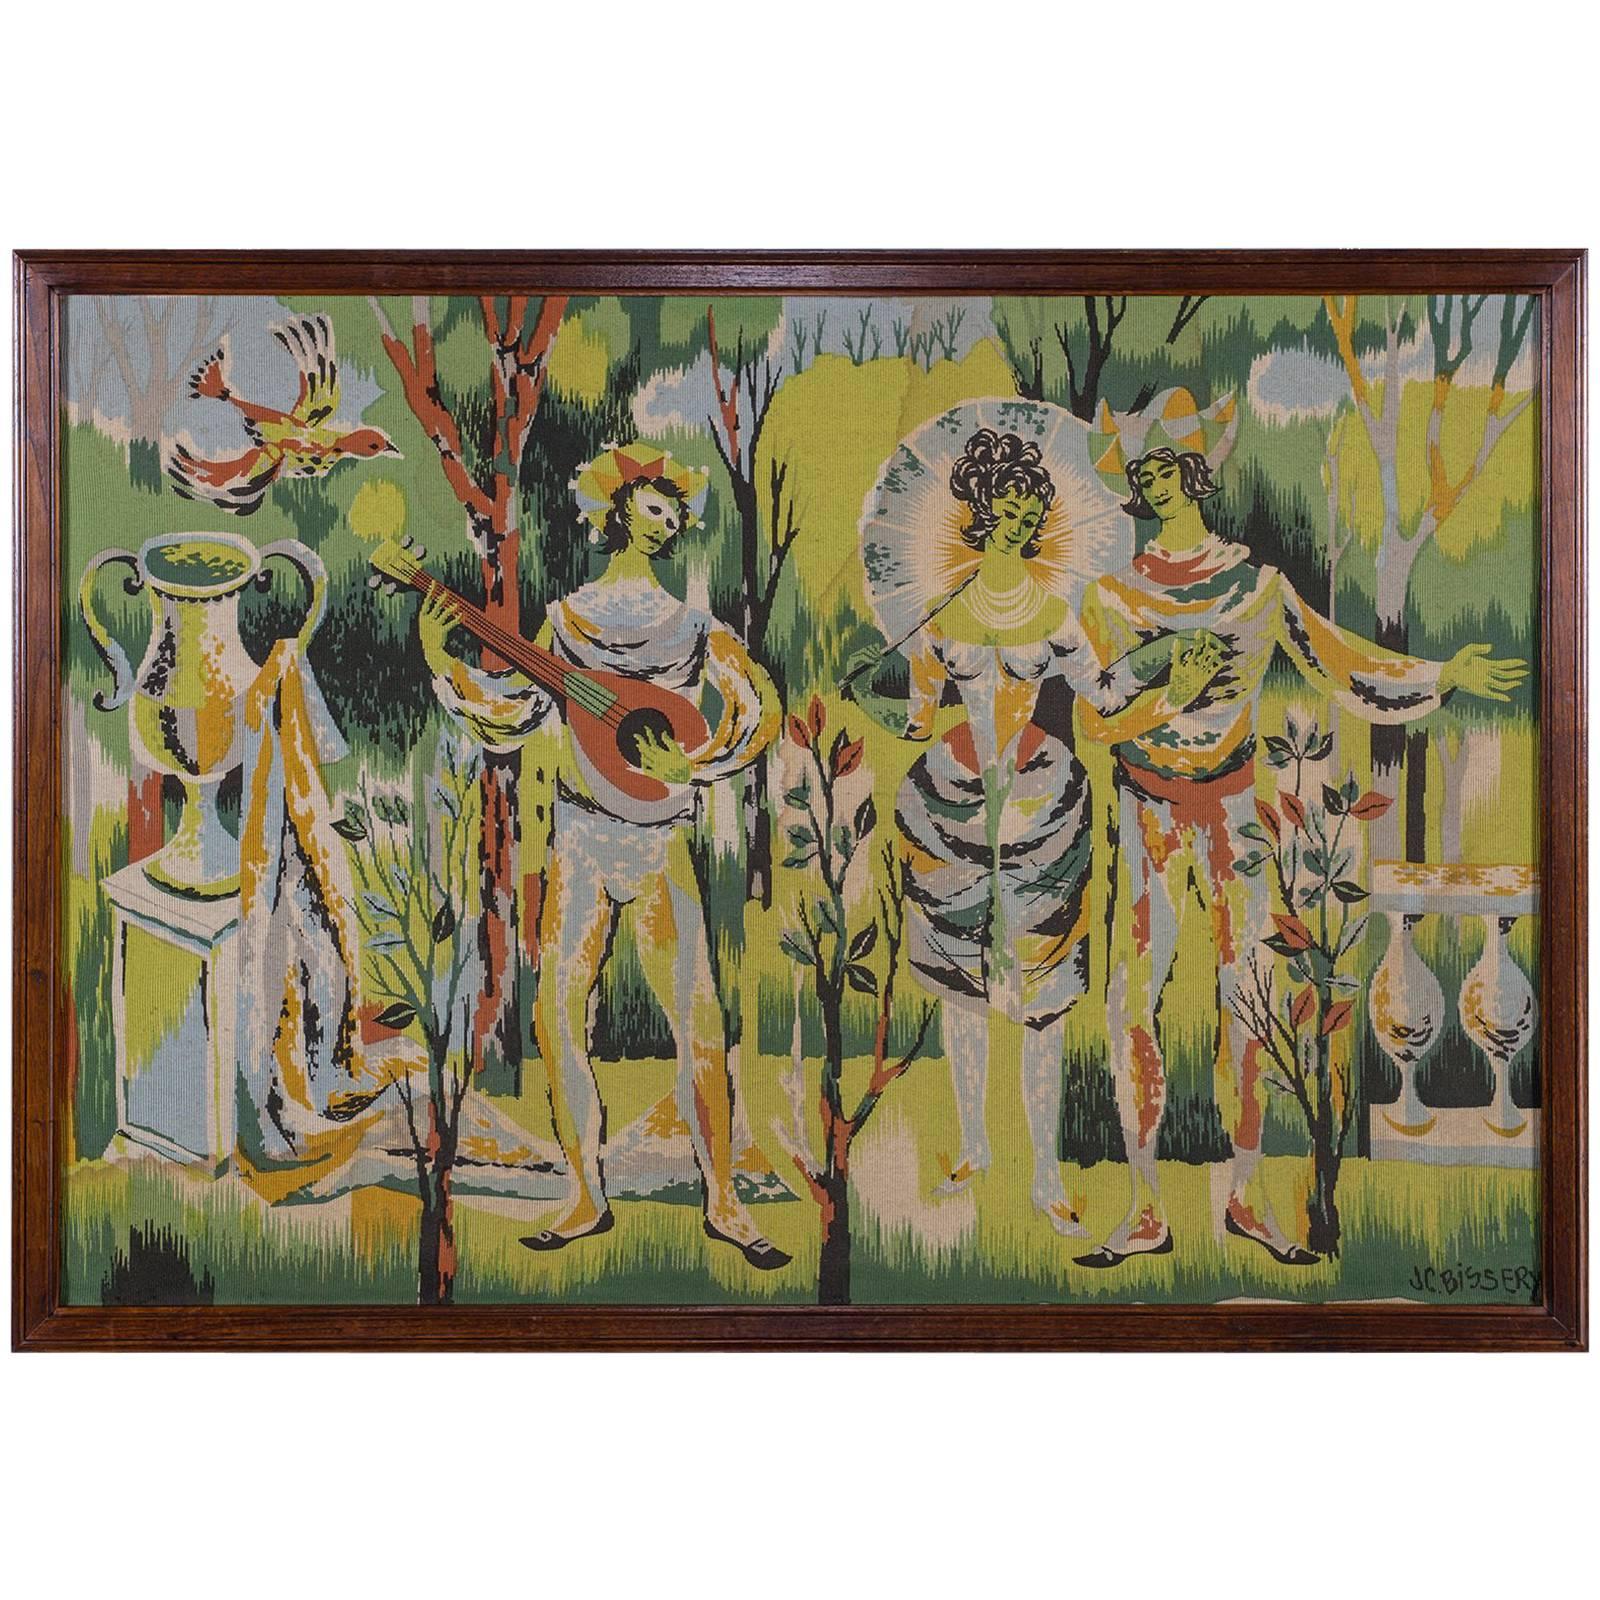 Vintage French Tapestry Neoclassical Scene of Figures circa 1960 Original Frame For Sale